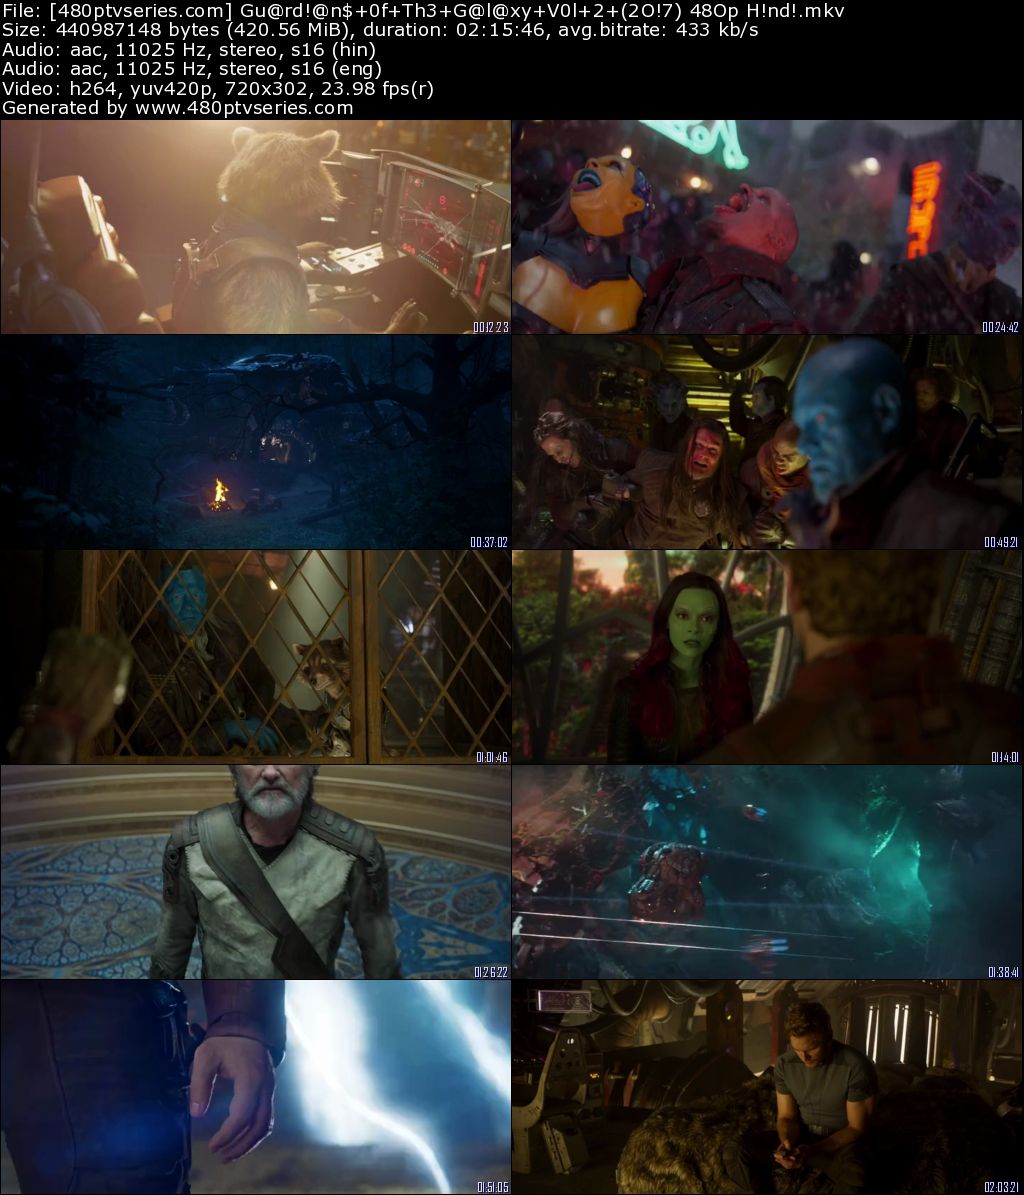 Guardians of the Galaxy Vol. 2 (2017) 400MB Full Hindi Dual Audio Movie Download 480p Bluray Free Watch Online Full Movie Download Worldfree4u 9xmovies